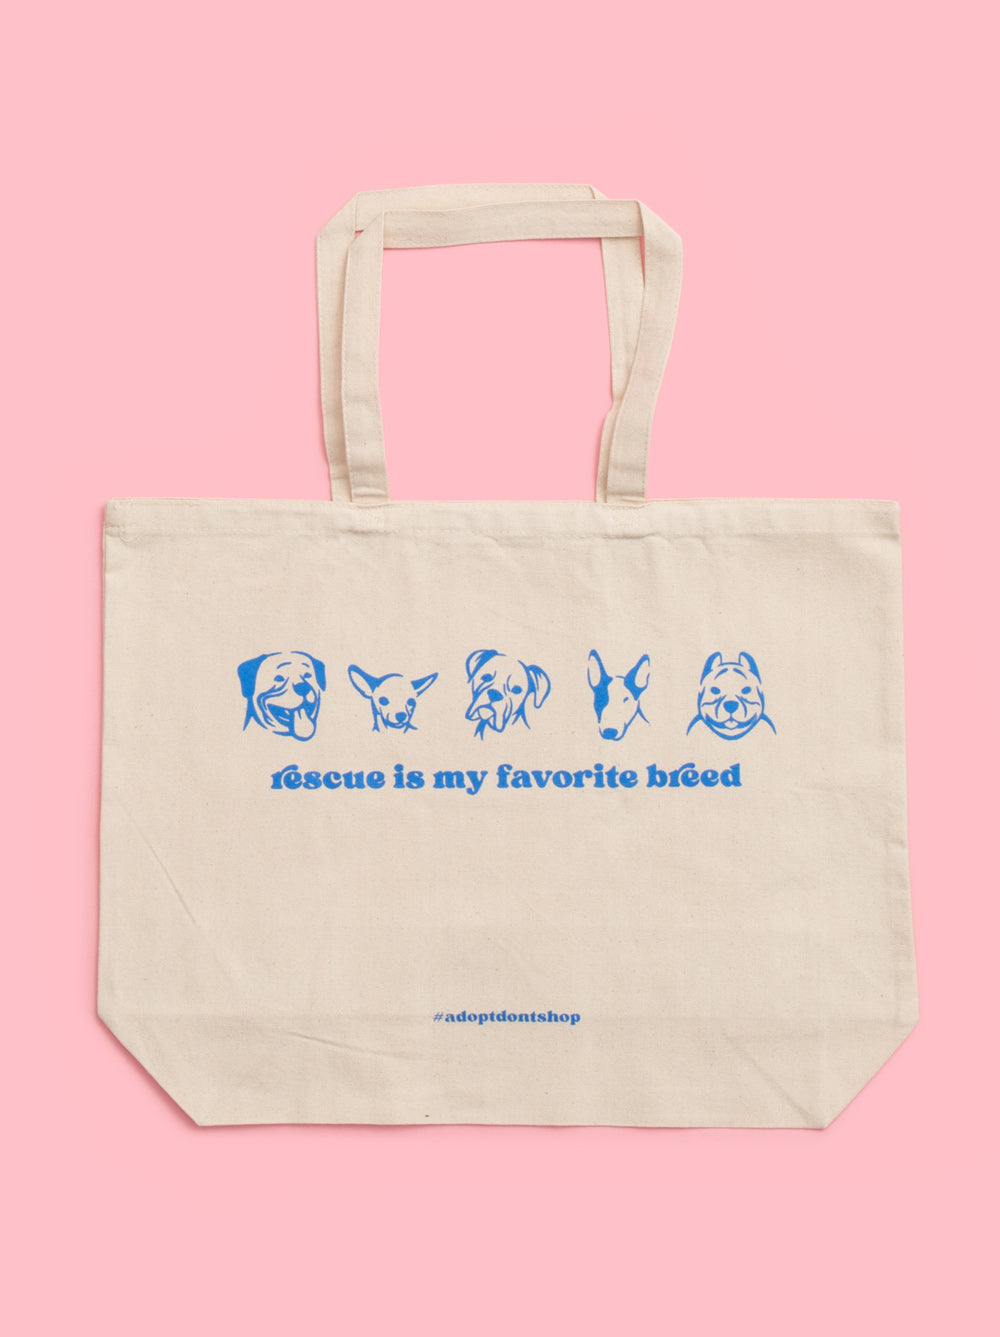 Rescue Is My Favorite Breed Tote